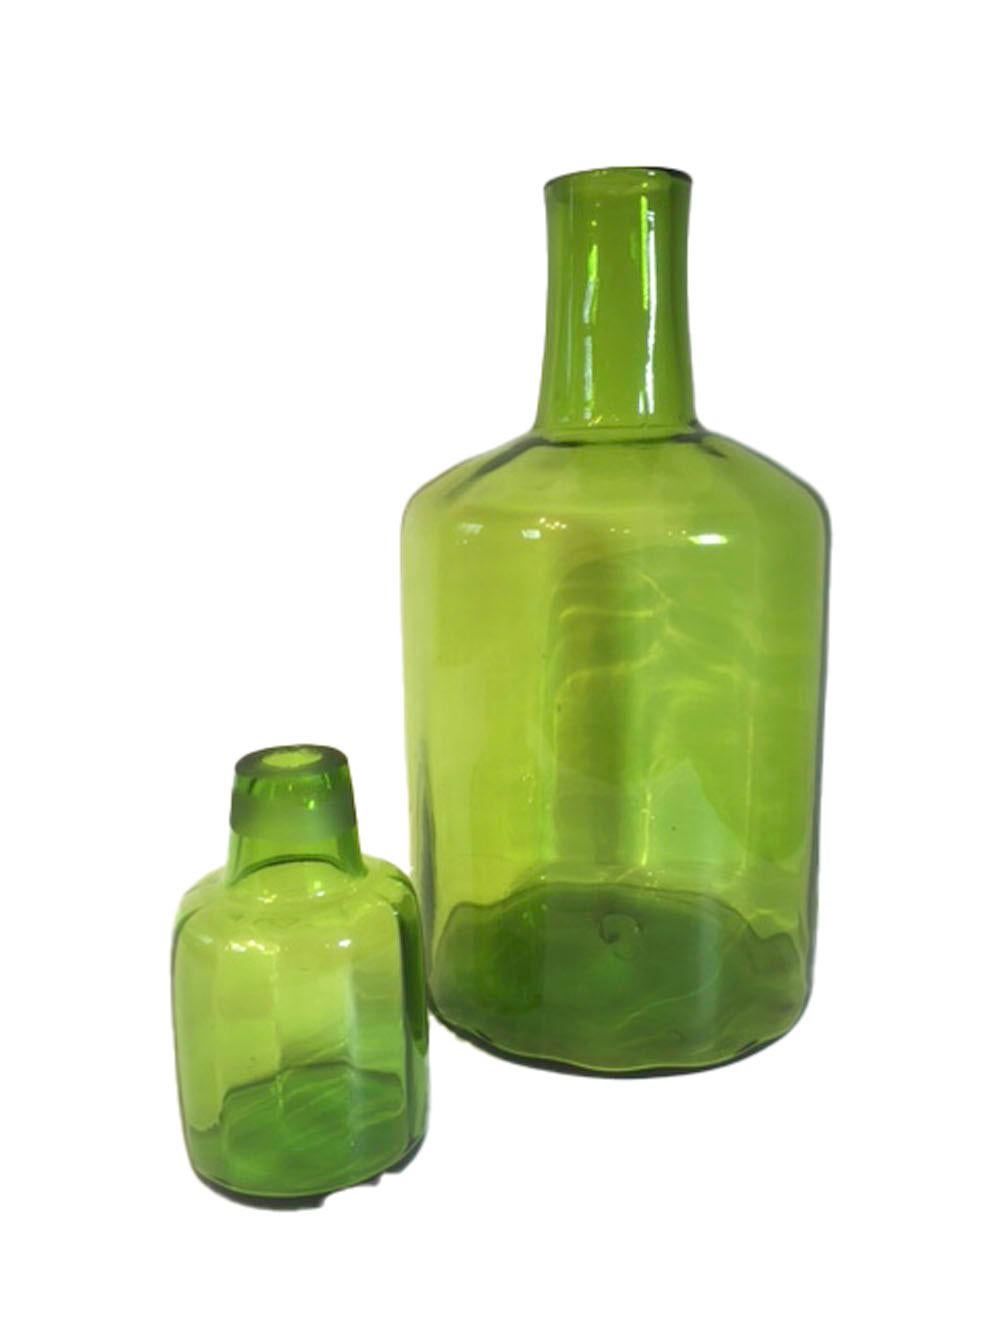 Large Mid-Century Modern floor vase by Blenko Glass in the form of an oversized decanter and stopper. The hand blown vivid green glass with optical ribbing and broken pontil. Measures: 24